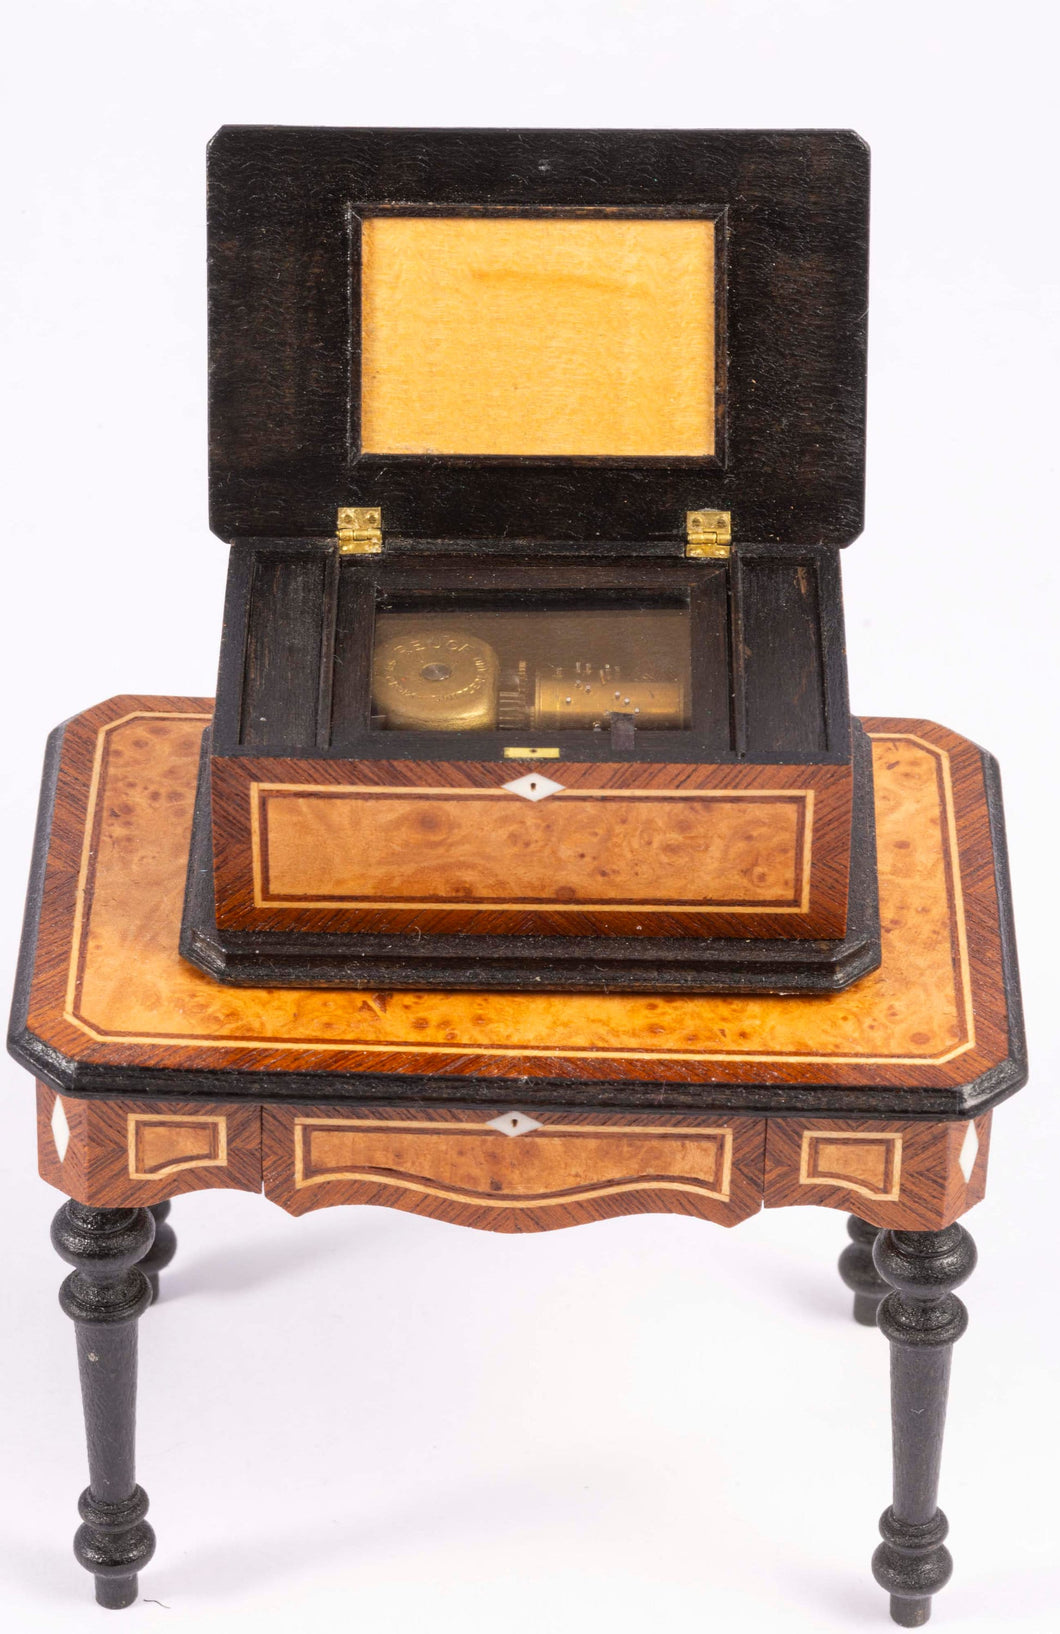 Dollhouse Miniature ~ Bill Studebaker Working Victorian Music Box,  From Lee Lefkowitz Collection